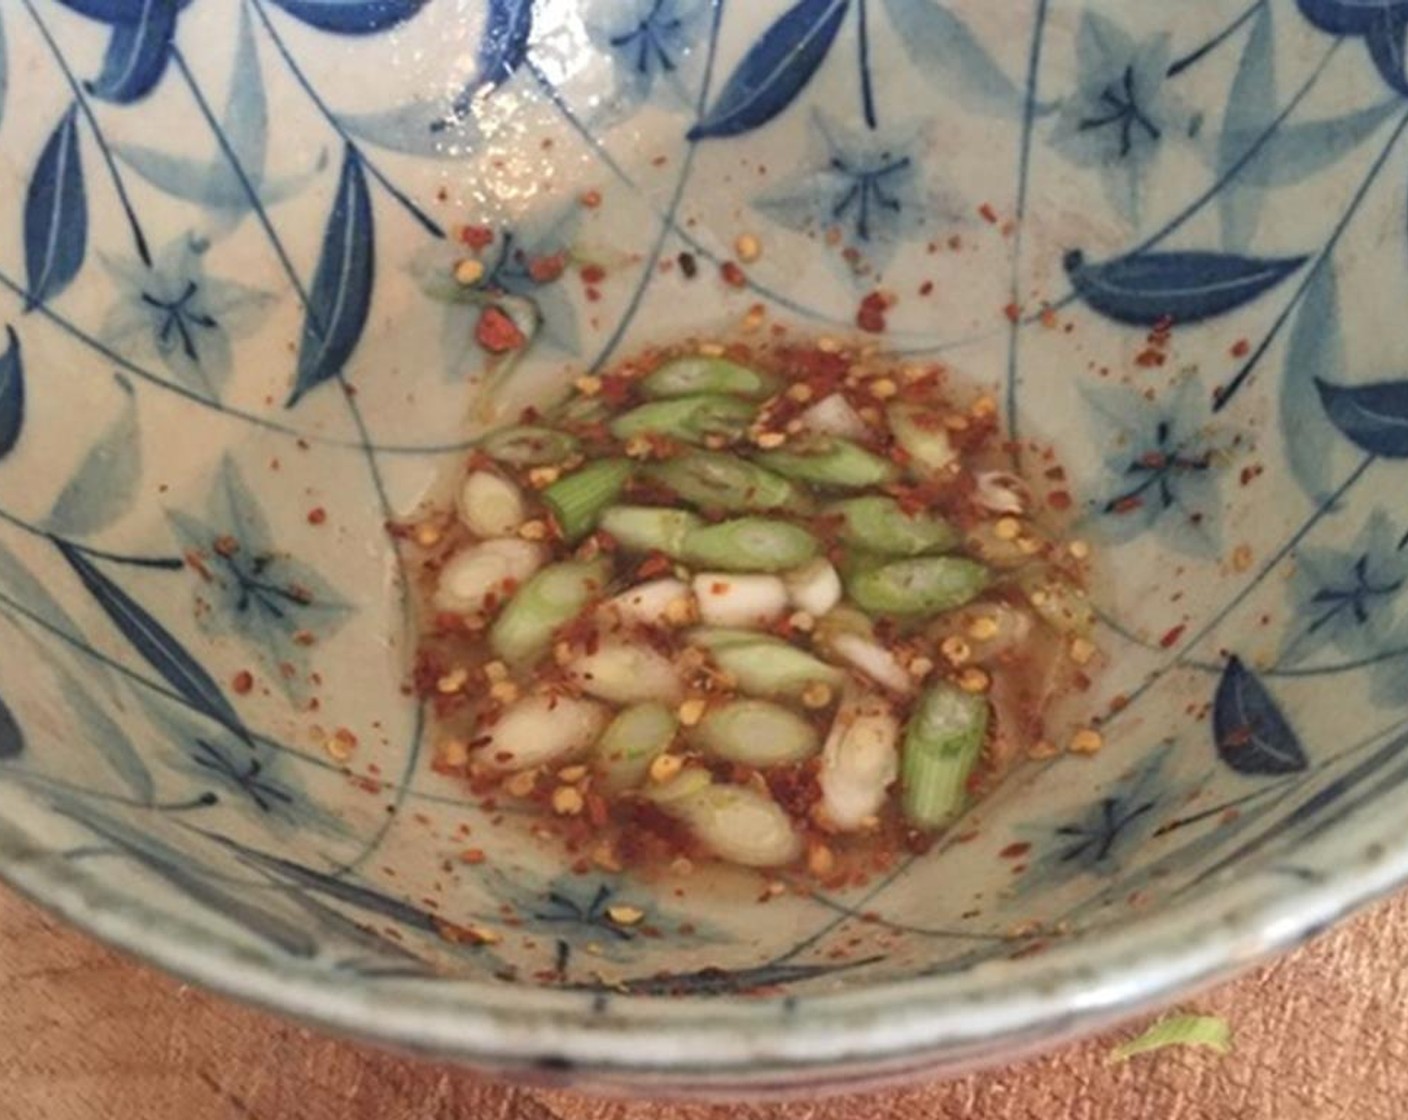 step 2 In a bowl put Fish Sauce (1 Tbsp), Lime (1), Granulated Sugar (1 tsp), and Crushed Red Pepper Flakes (to taste). Stir to dissolve the sugar and then add your sliced Scallion (1 bunch).